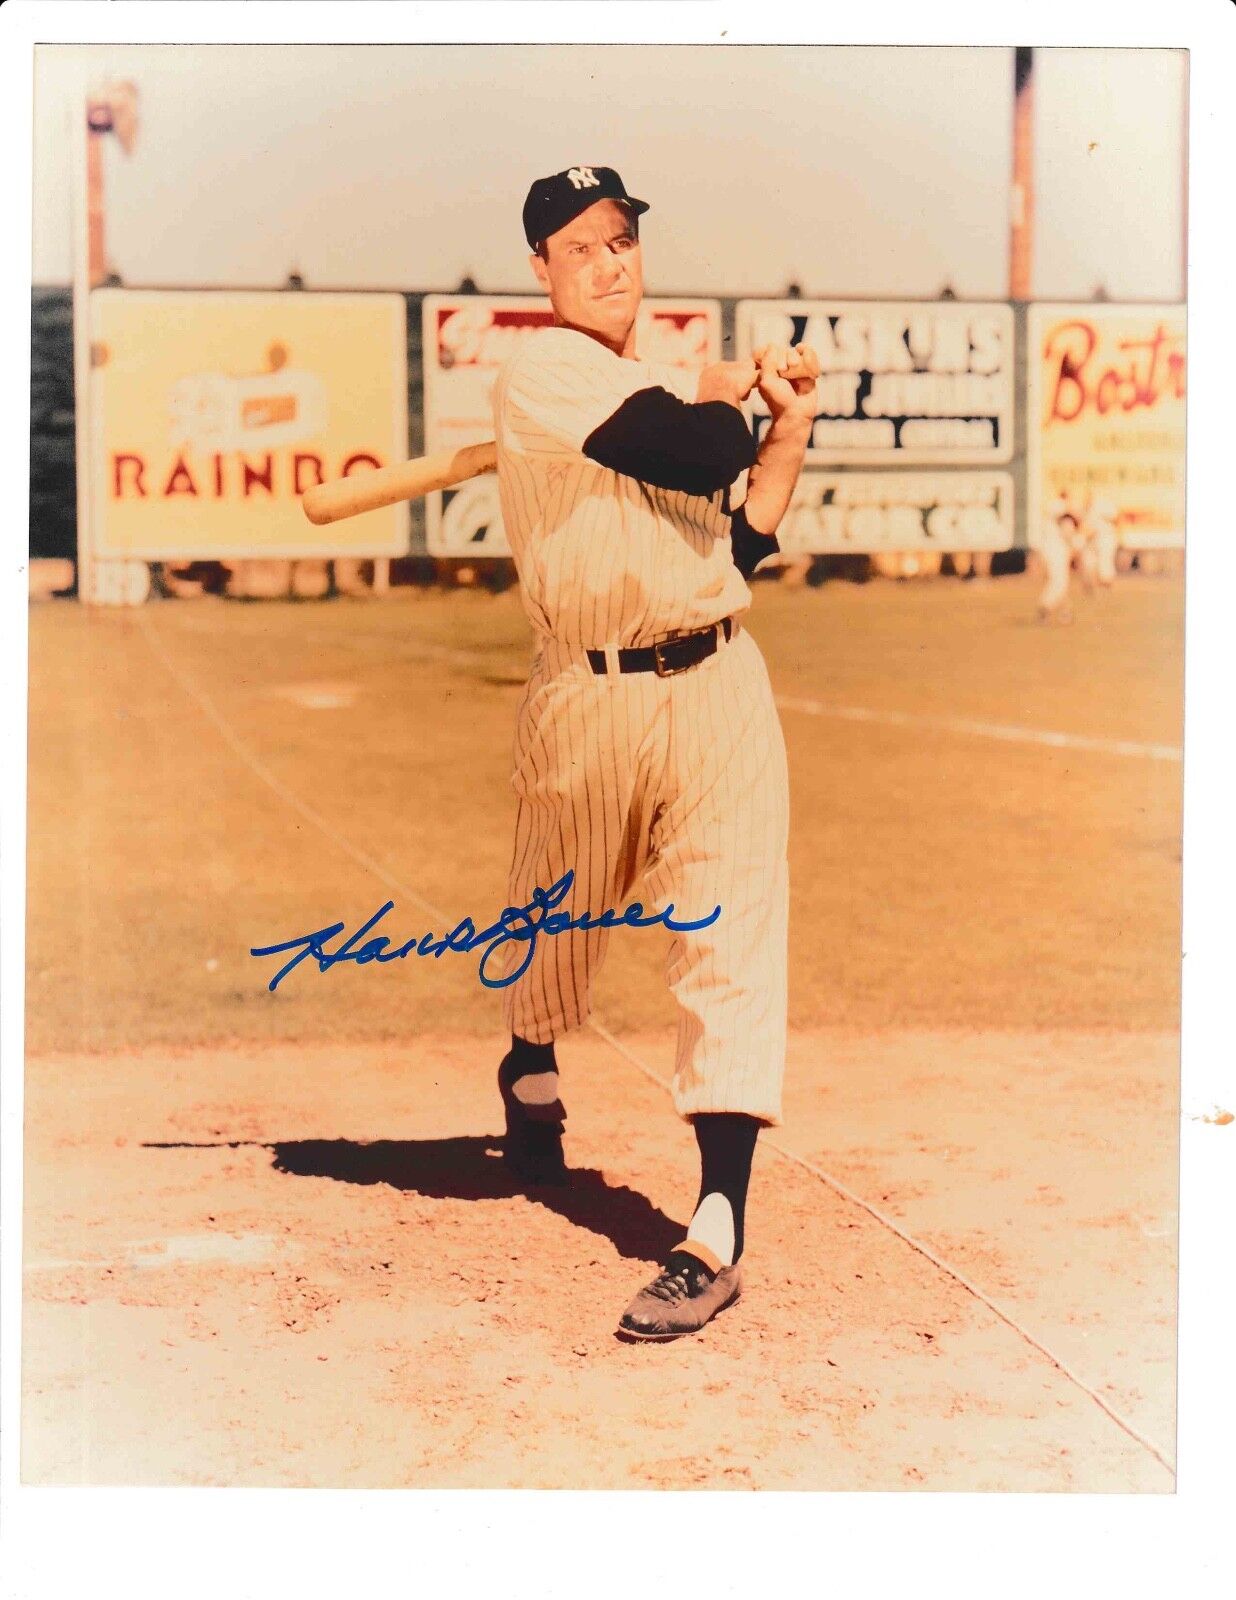 Hank Bauer Signed Autograph 8x10 Photo New York Yankees